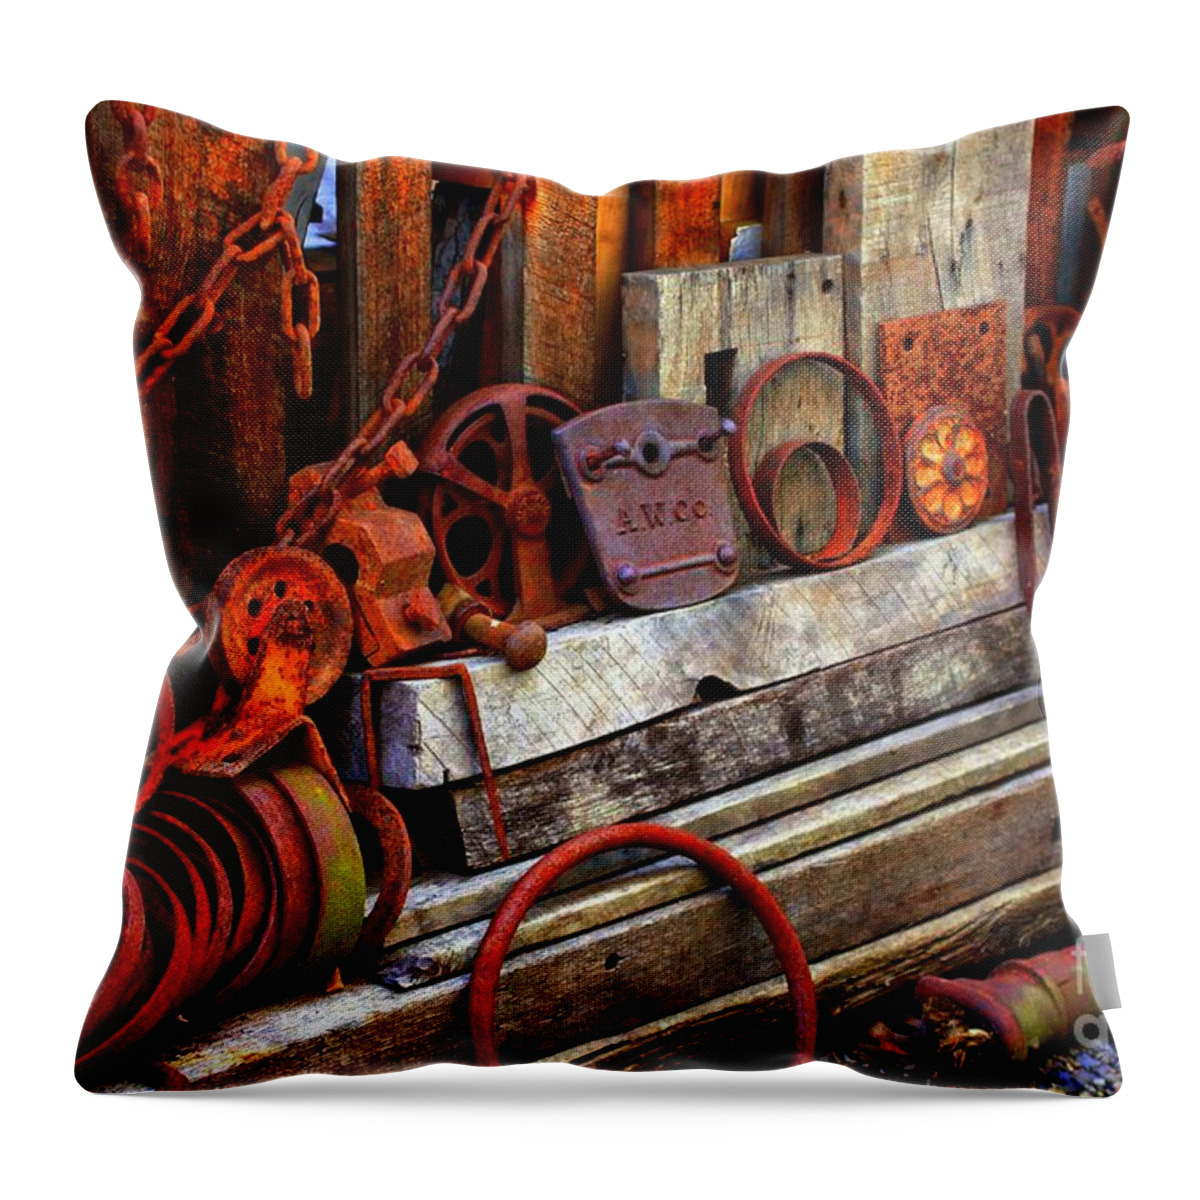 Marcia Lee Jones Throw Pillow featuring the photograph Weathered Rims And Chainss by Marcia Lee Jones